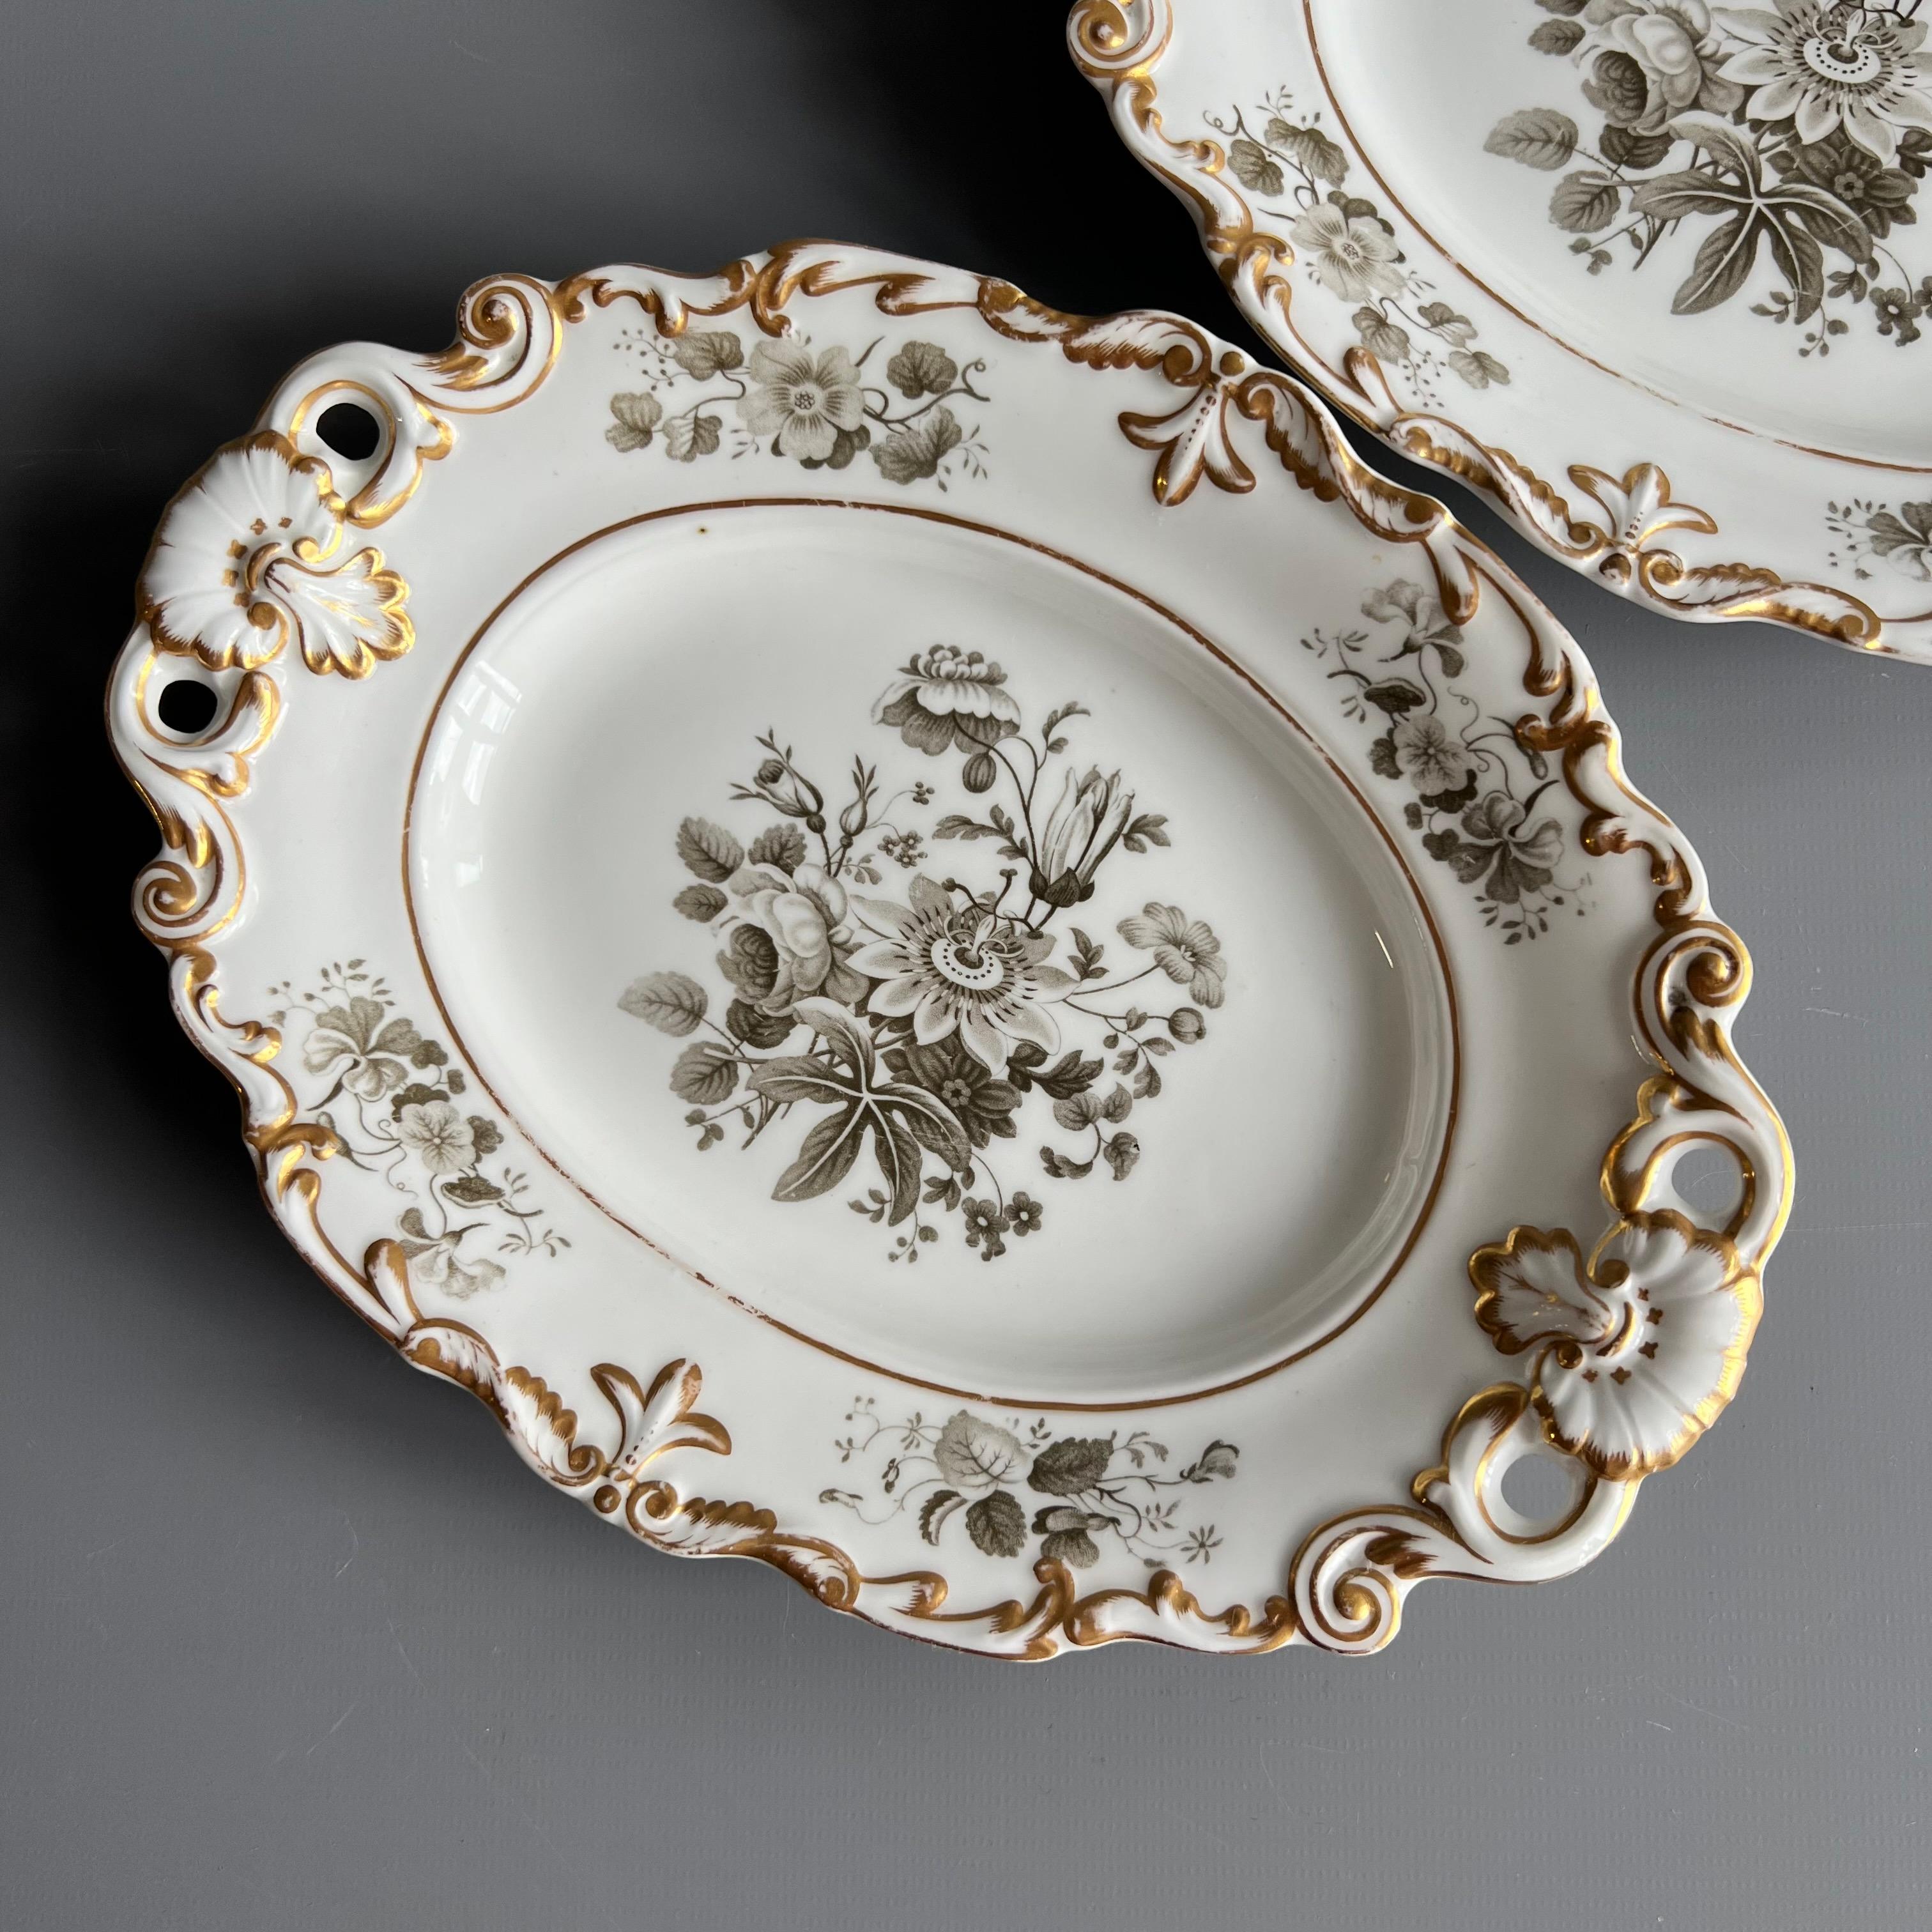 Minton Dessert Service, Inverted Shell White with Monochrome Flowers, ca 1830 For Sale 4